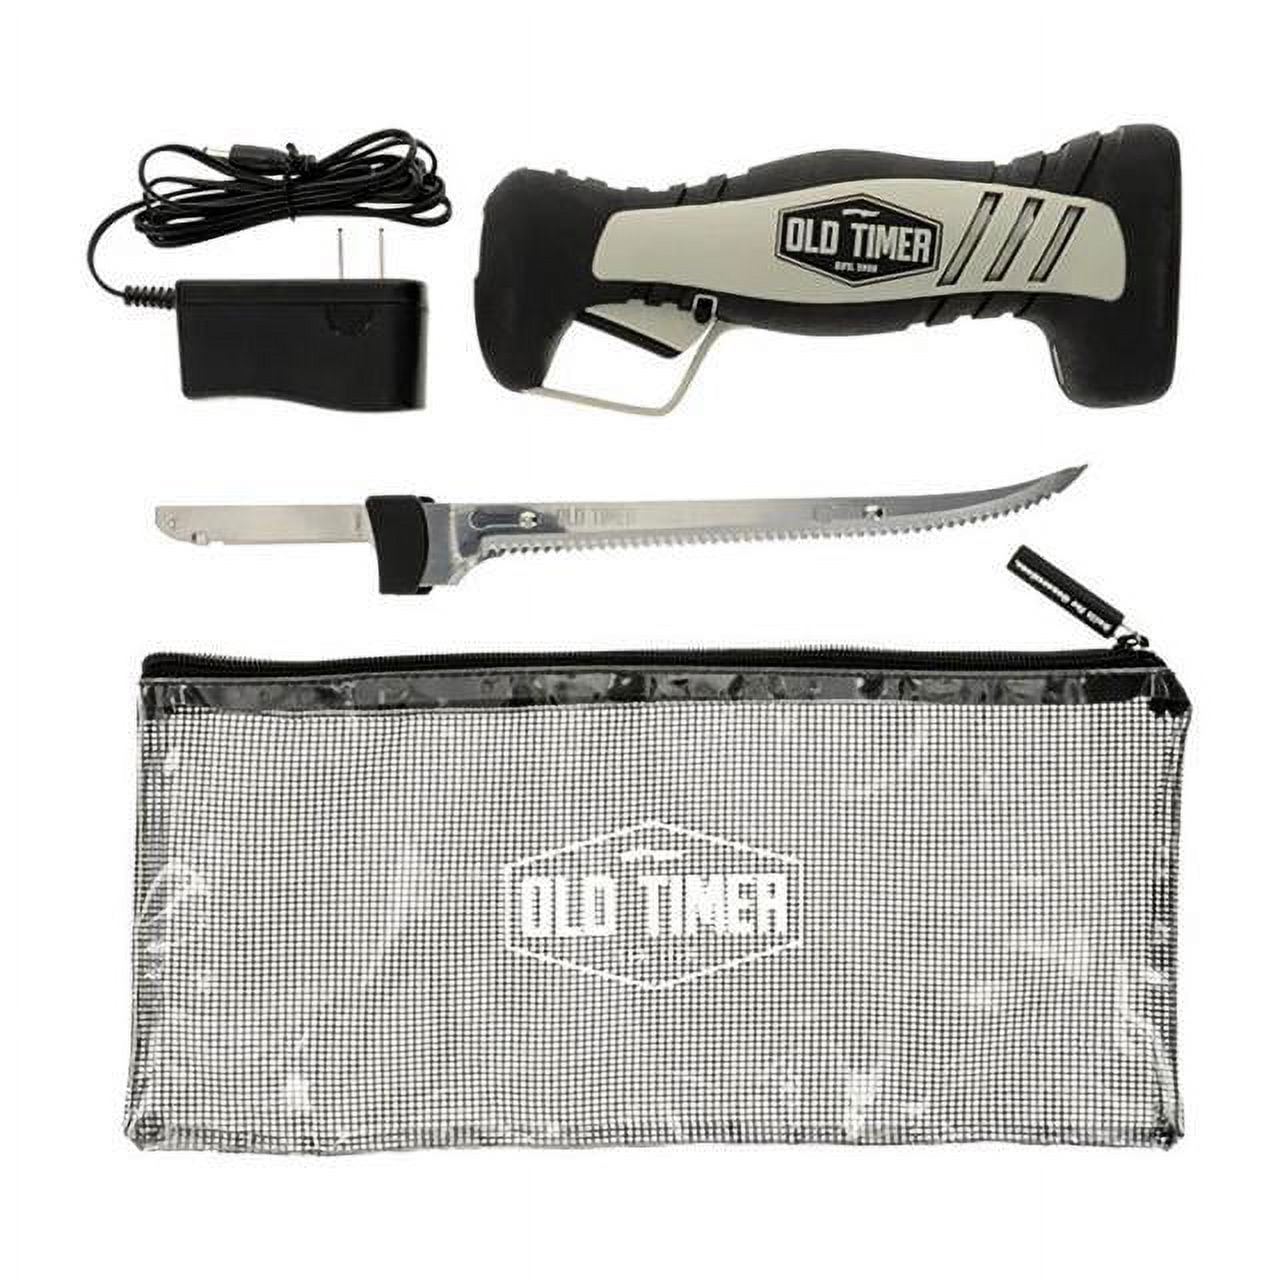 Old Timer 110V Electric Fillet Knife with 8in Fully Serrated  Stainless-Steel Blade, Trigger Lock, Classic Fillet Knife Cut, 8ft Cord,  and Self Draining Carry Case for Fishing, Filleting, and Outdoors - Yahoo